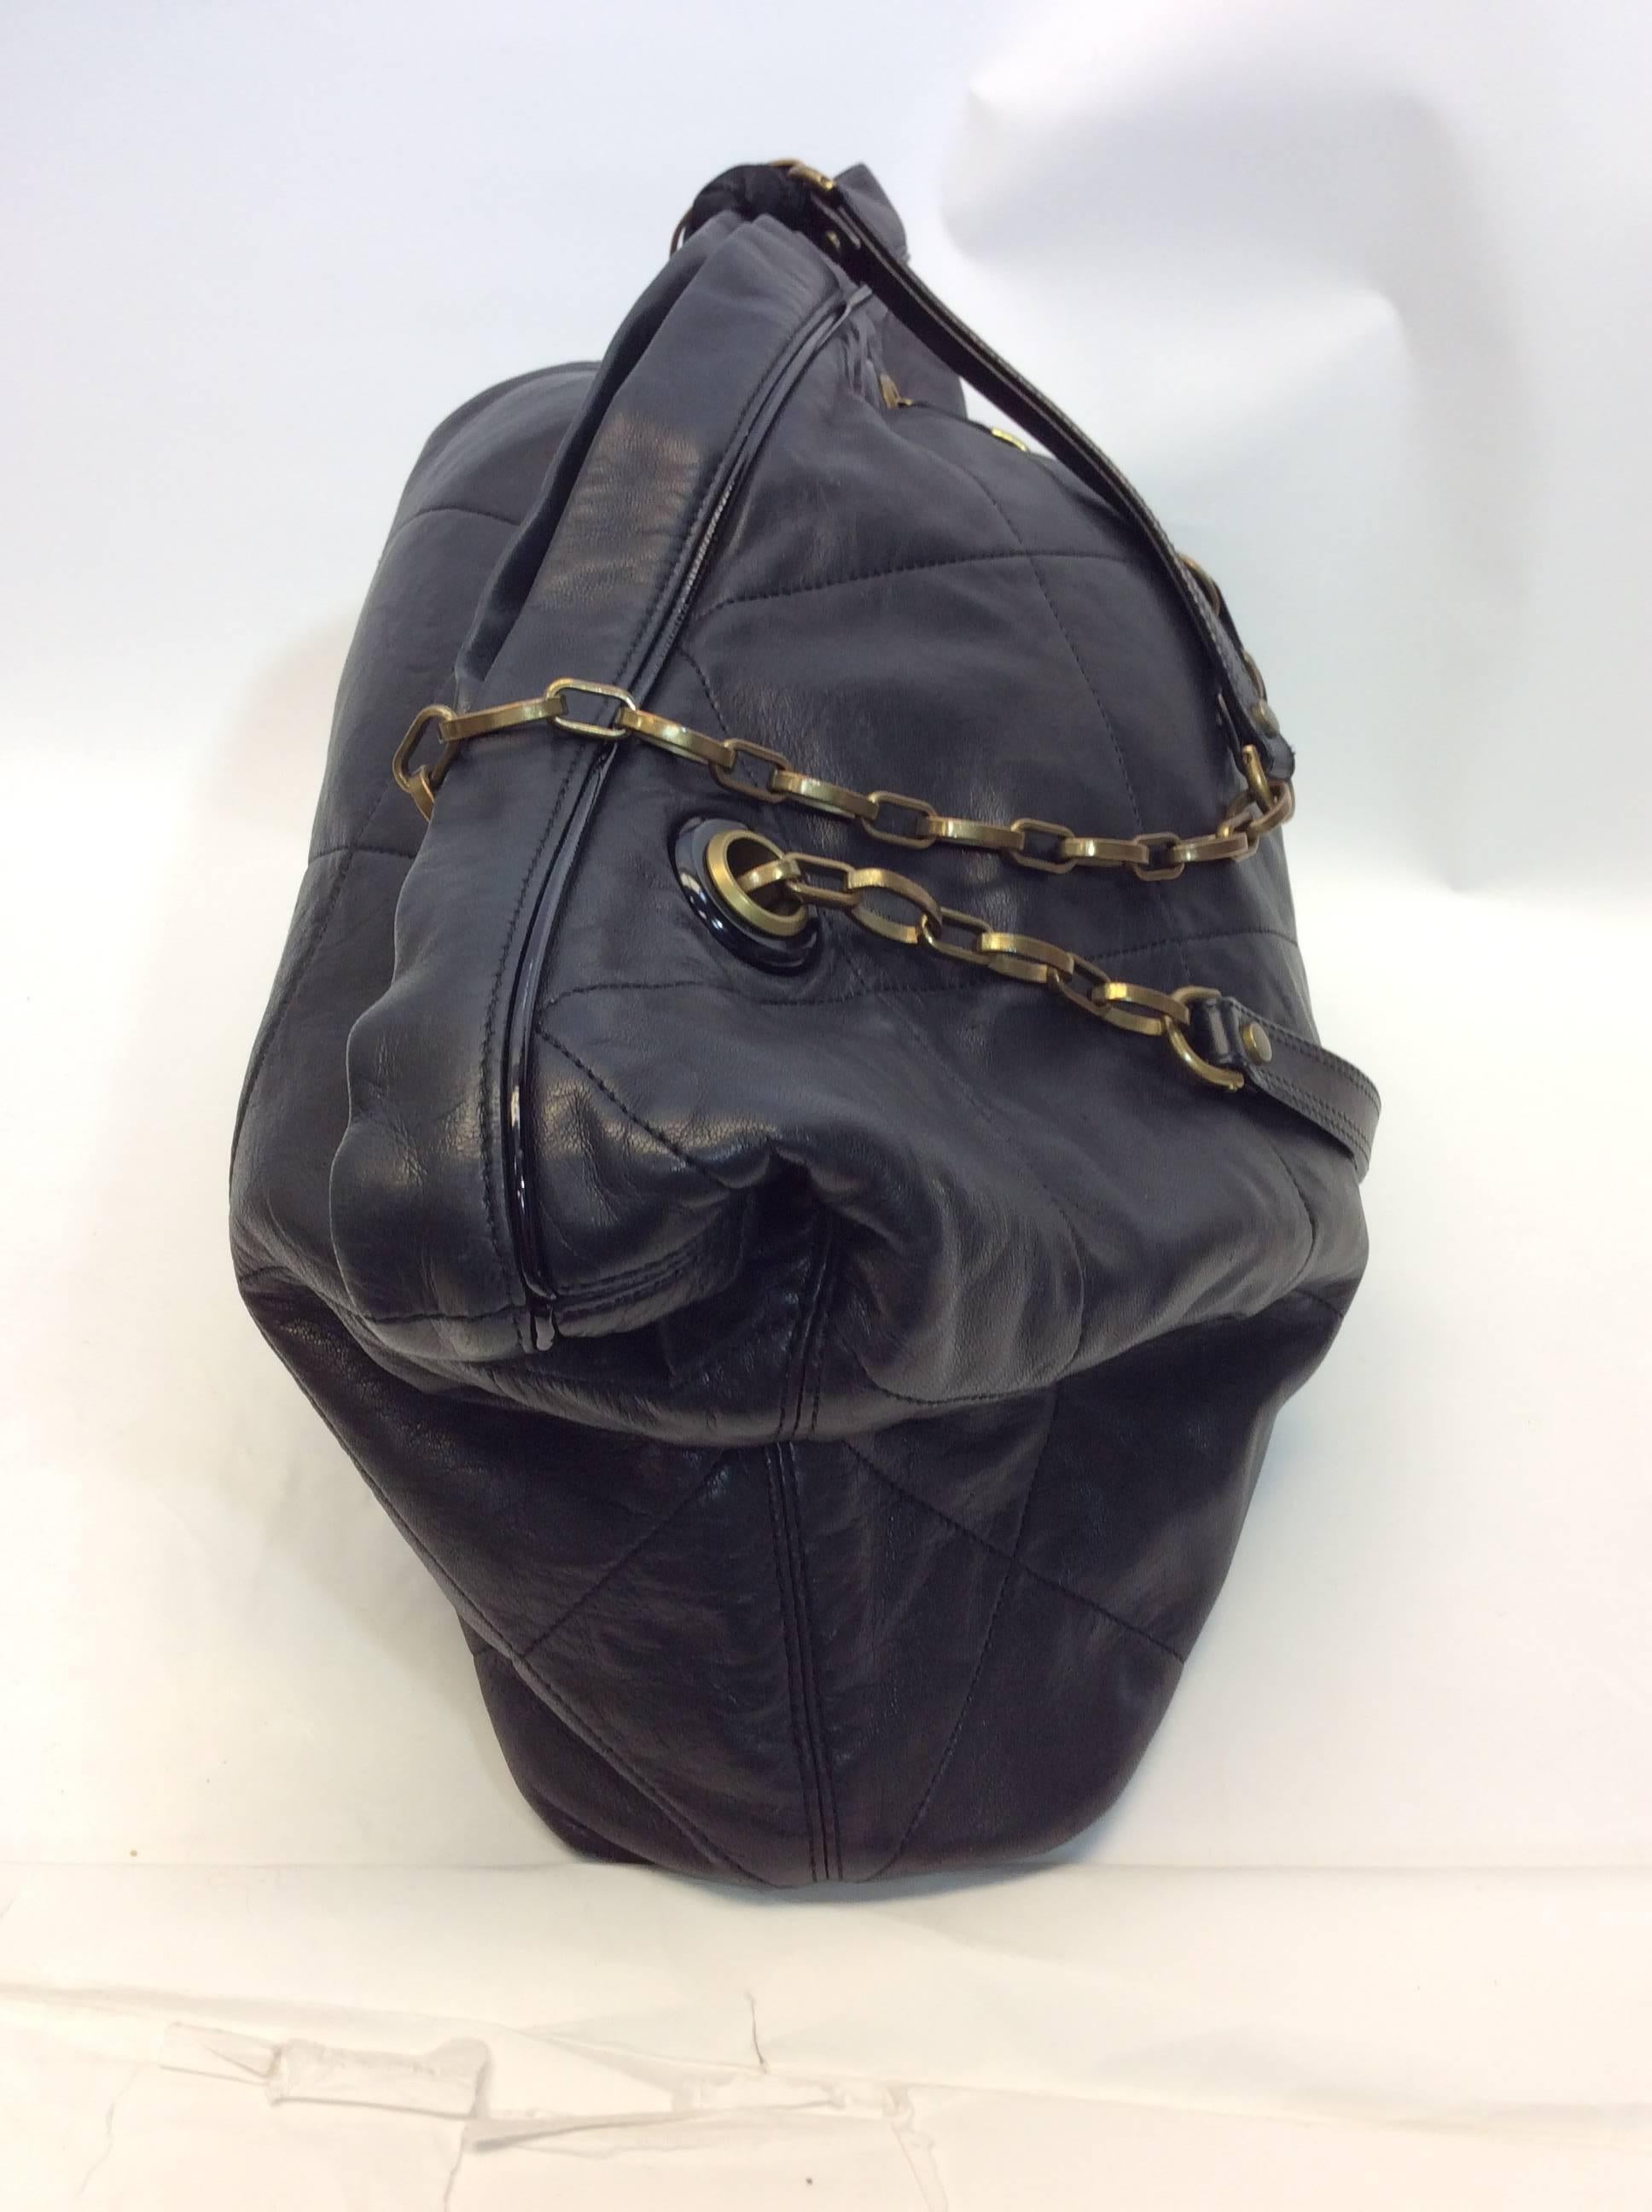 Lanvin Quilted Leather Large Chain Link Purse
$550
Chain link straps are interwoven with ribbon 
Magnetic closure
Made in Italy
Interior pocket